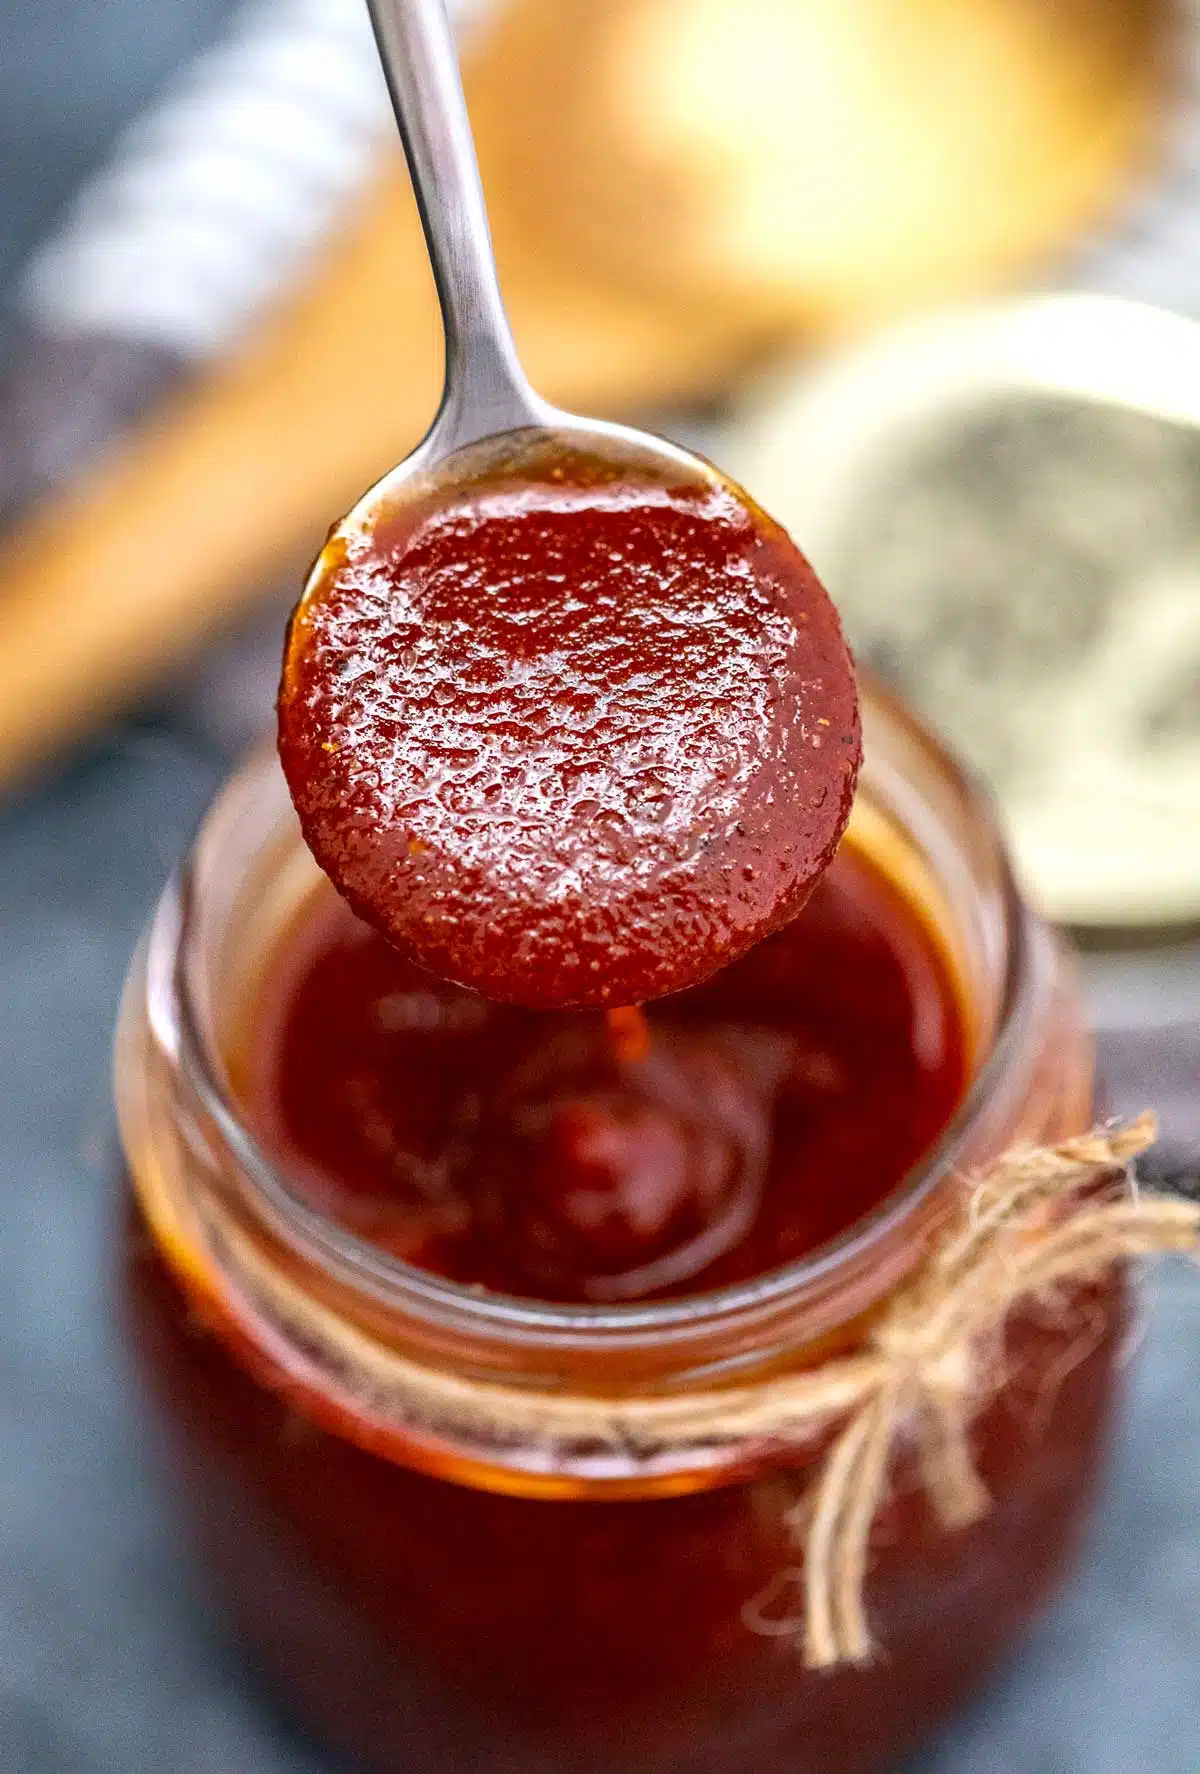 Homemade Barbecue Sauce [Video] - S&SM